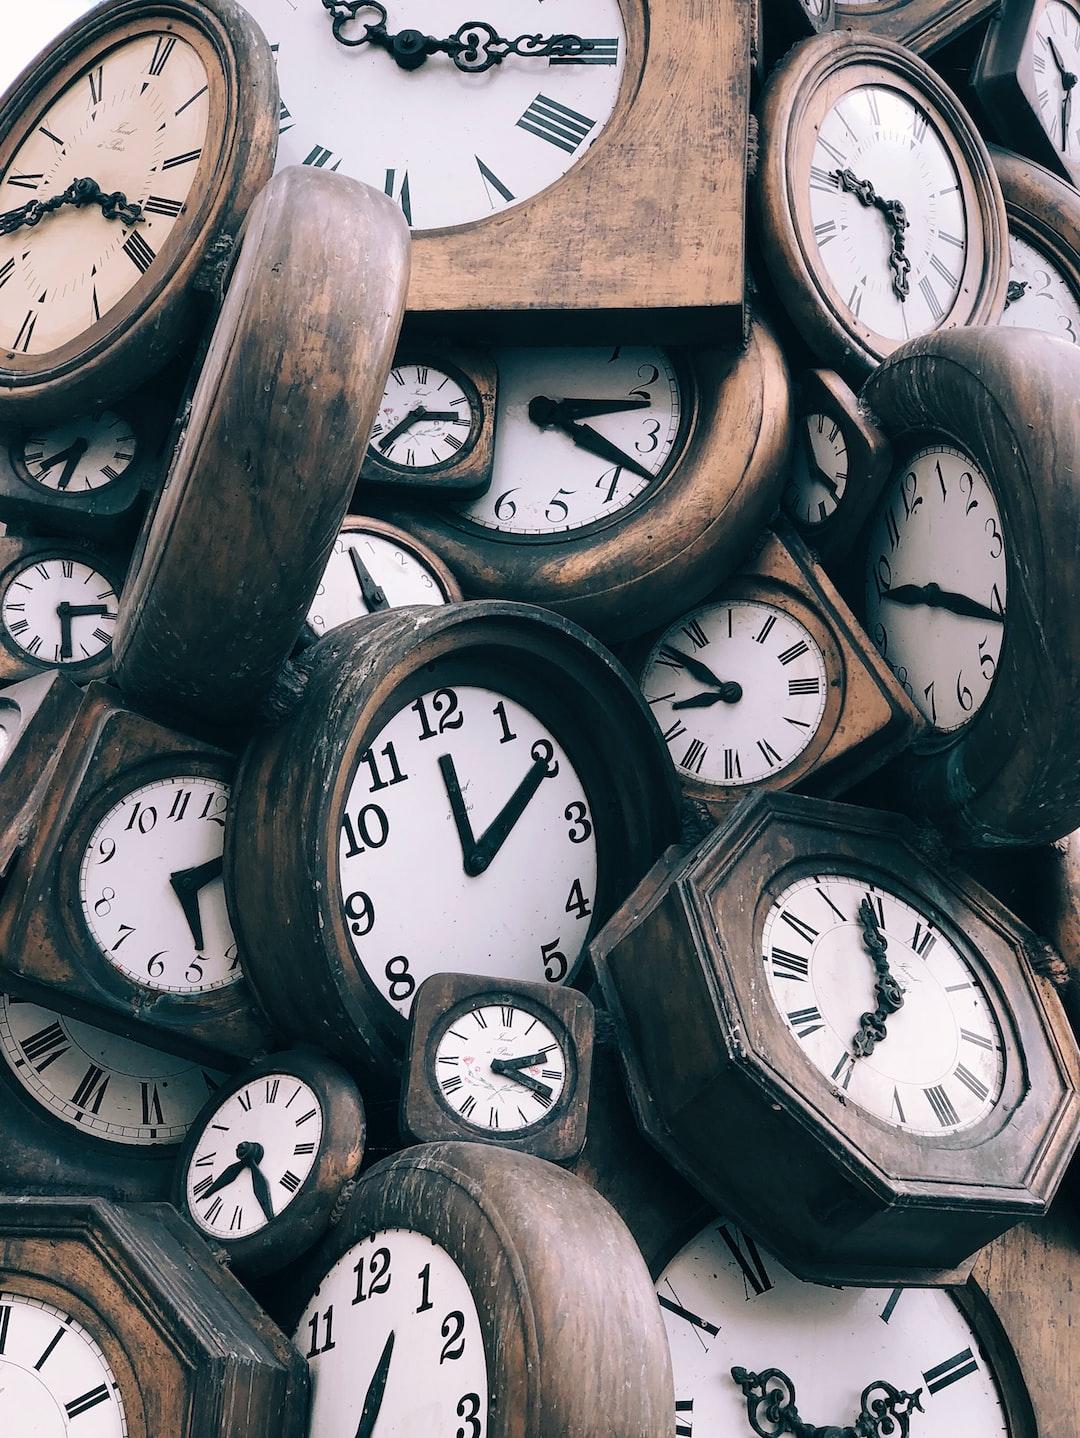 Understanding Time as Our Most Precious Resource